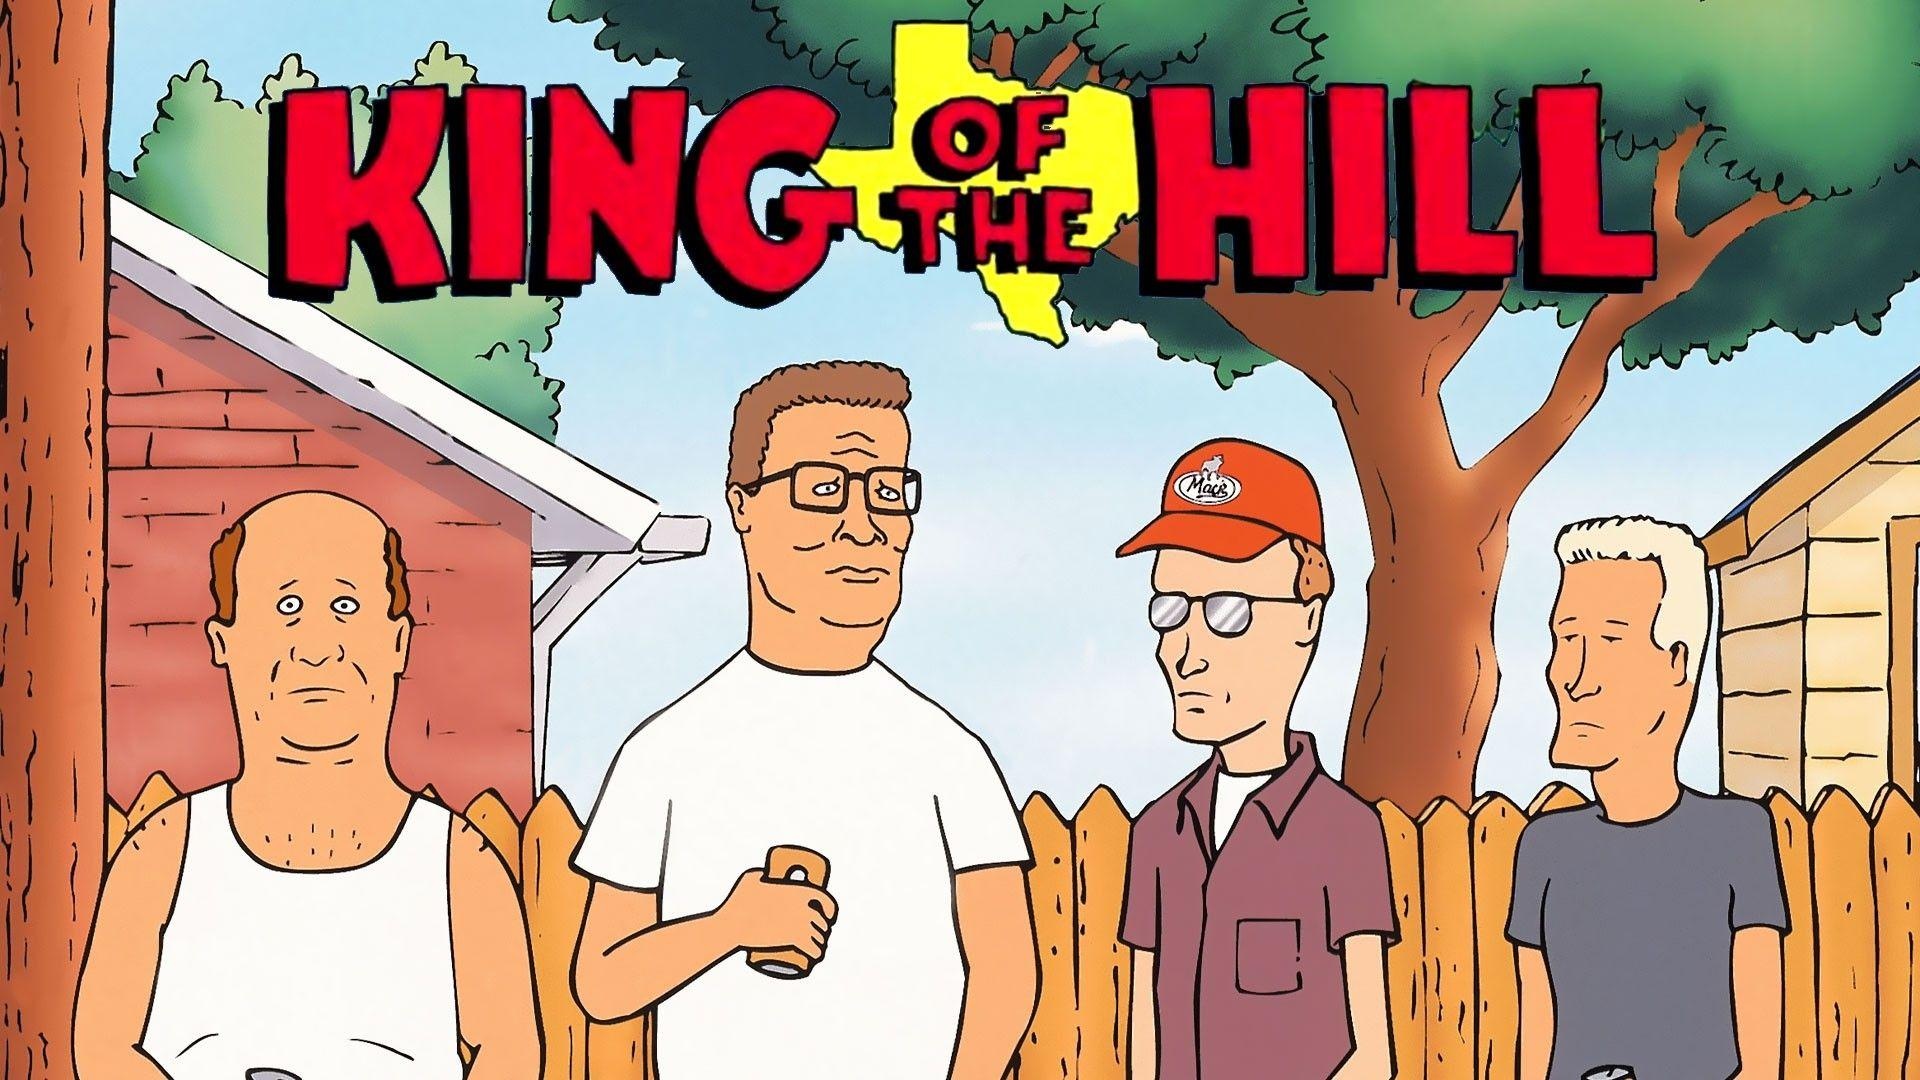 King of the Hill, Possible revival, Teased by writer, The Cultured Nerd, 1920x1080 Full HD Desktop